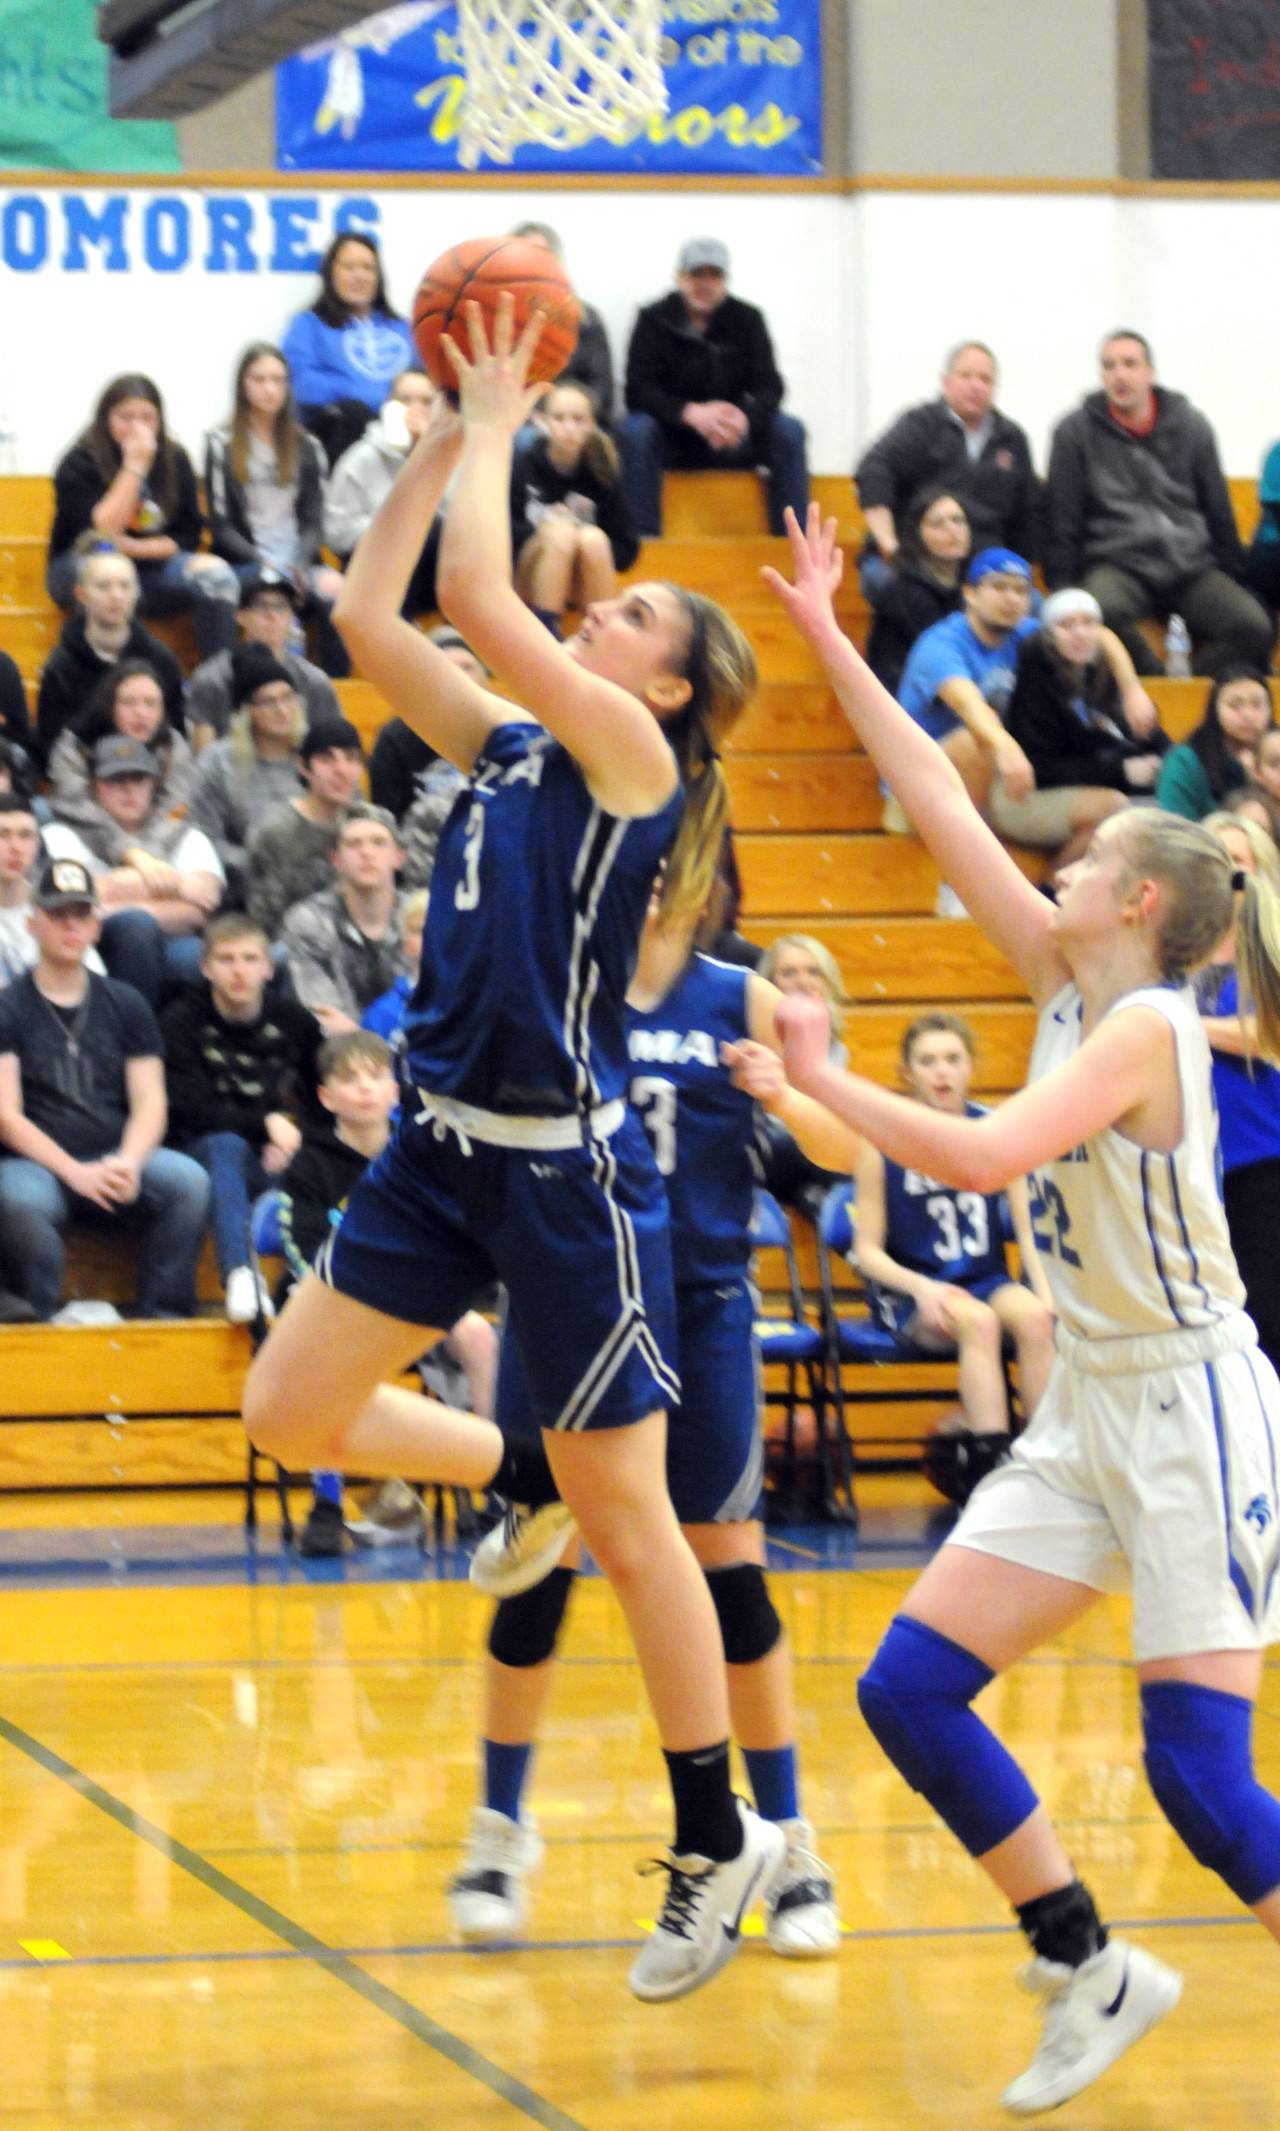 Elma’s Jalyn Sackrider, left, scores two of her game-high 31 points to lead the Eagles to their second straight 1A District 4 championship after defeating La Center 66-40 on Wednesday at Rochester High School. (Ryan Sparks | Grays Harbor News Group)